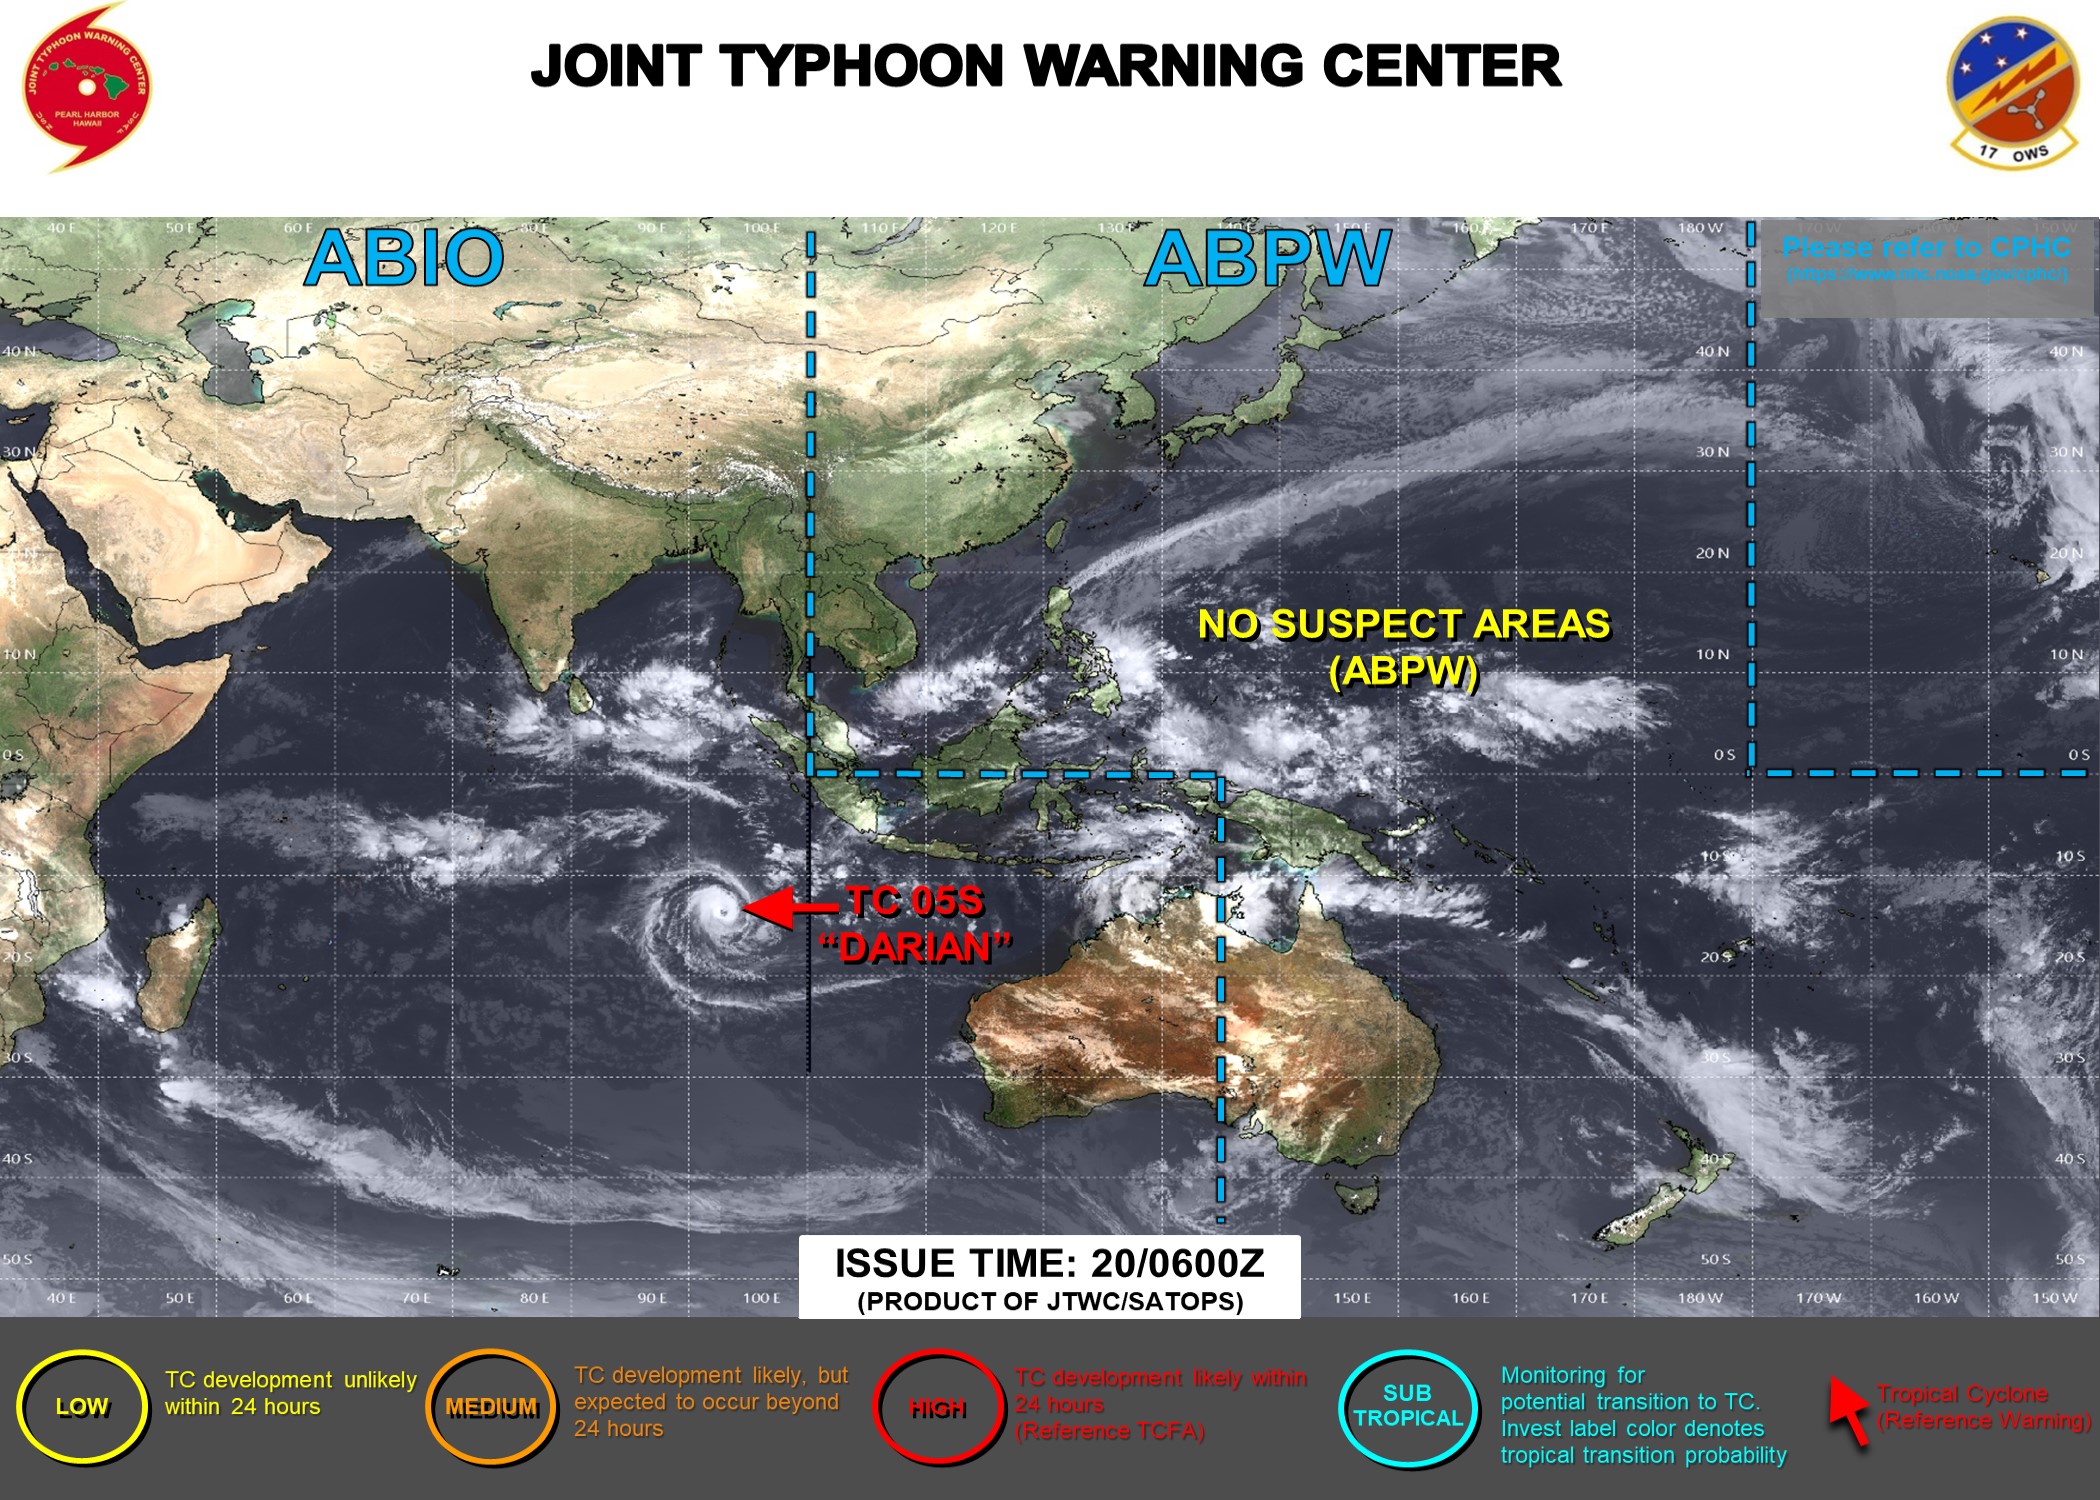 JTWC IS ISSUING 12HOURLY WARNINGS AND 3HOURLY SATELLITE BULLETINS ON TC 05S(DARIAN).